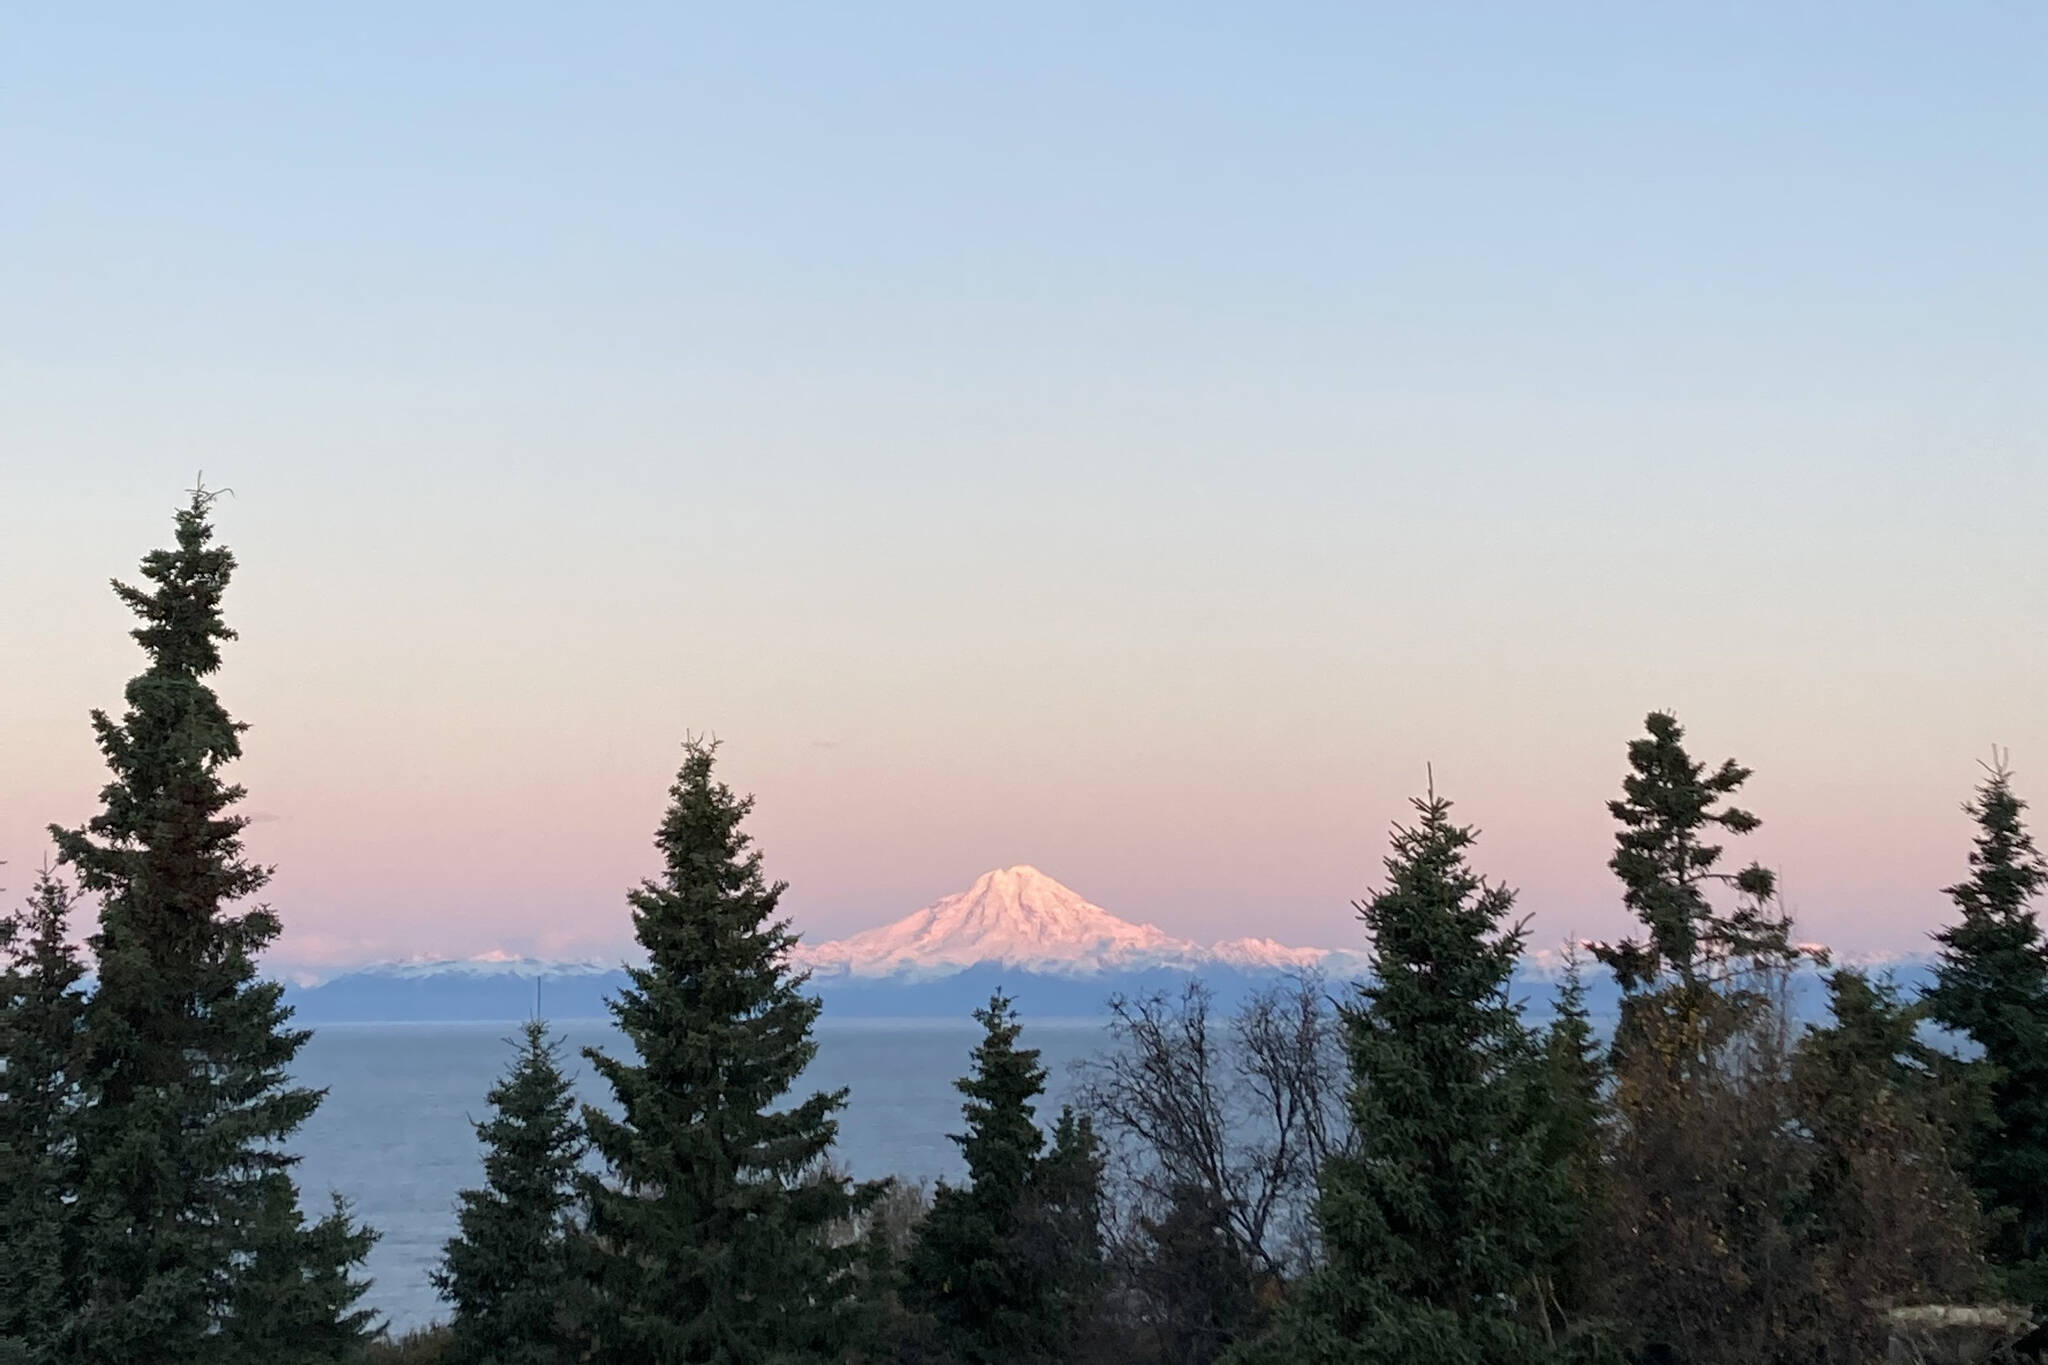 The sunrise shines on Mt. Redoubt Sunday, Oct. 10, creating hues of pinks, yellows and blues as it lights up the sky. (Photo by Sarah Knapp/Homer News)